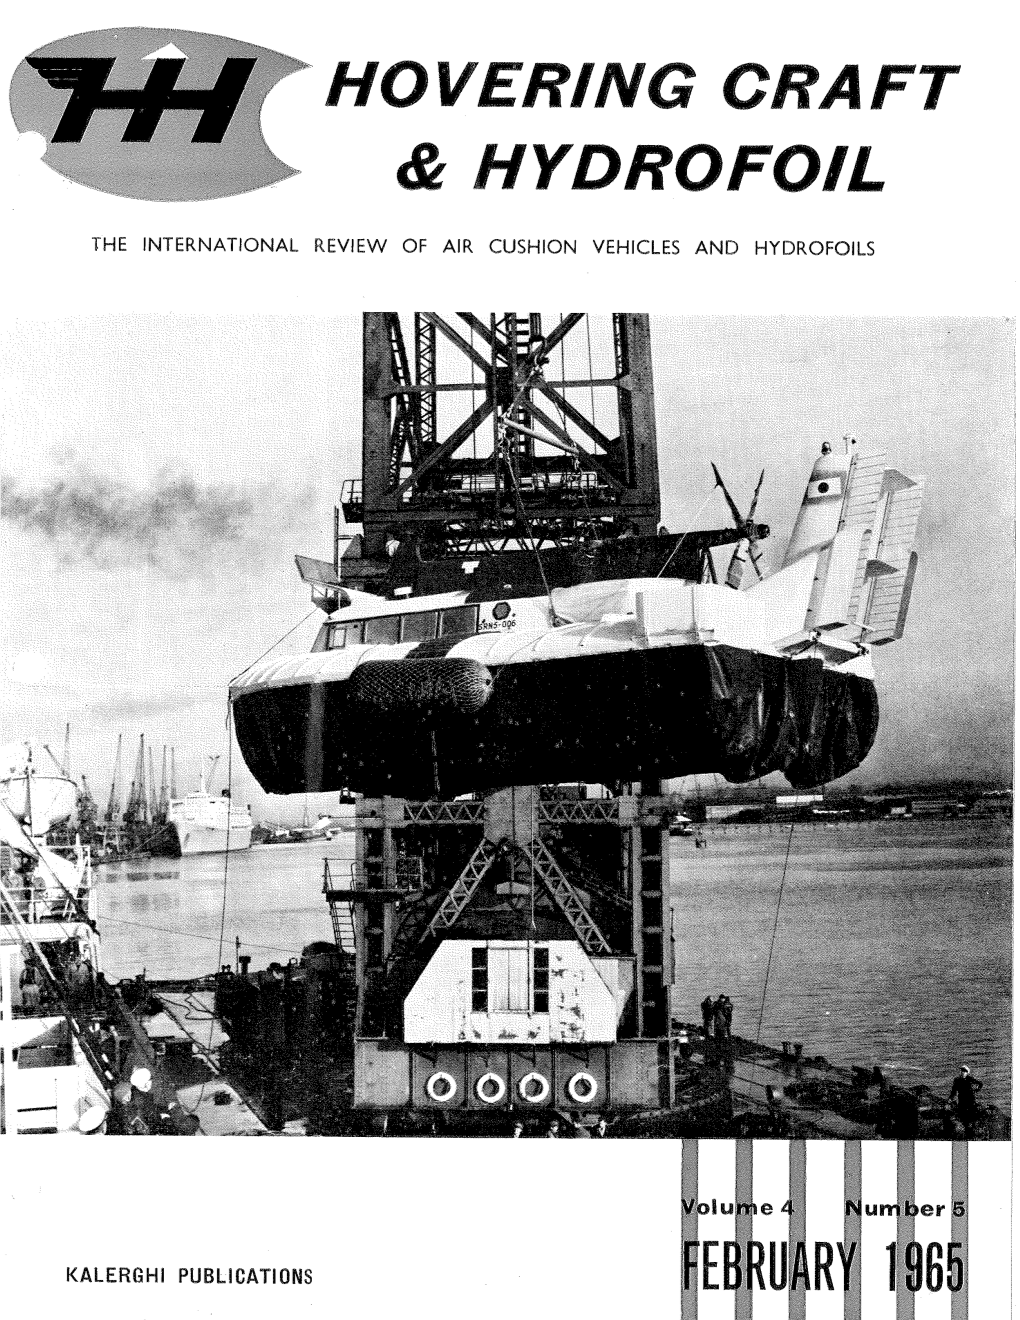 Hovering Craft & Hydrofoil Magazine February 1965 Volume 4 Number 5